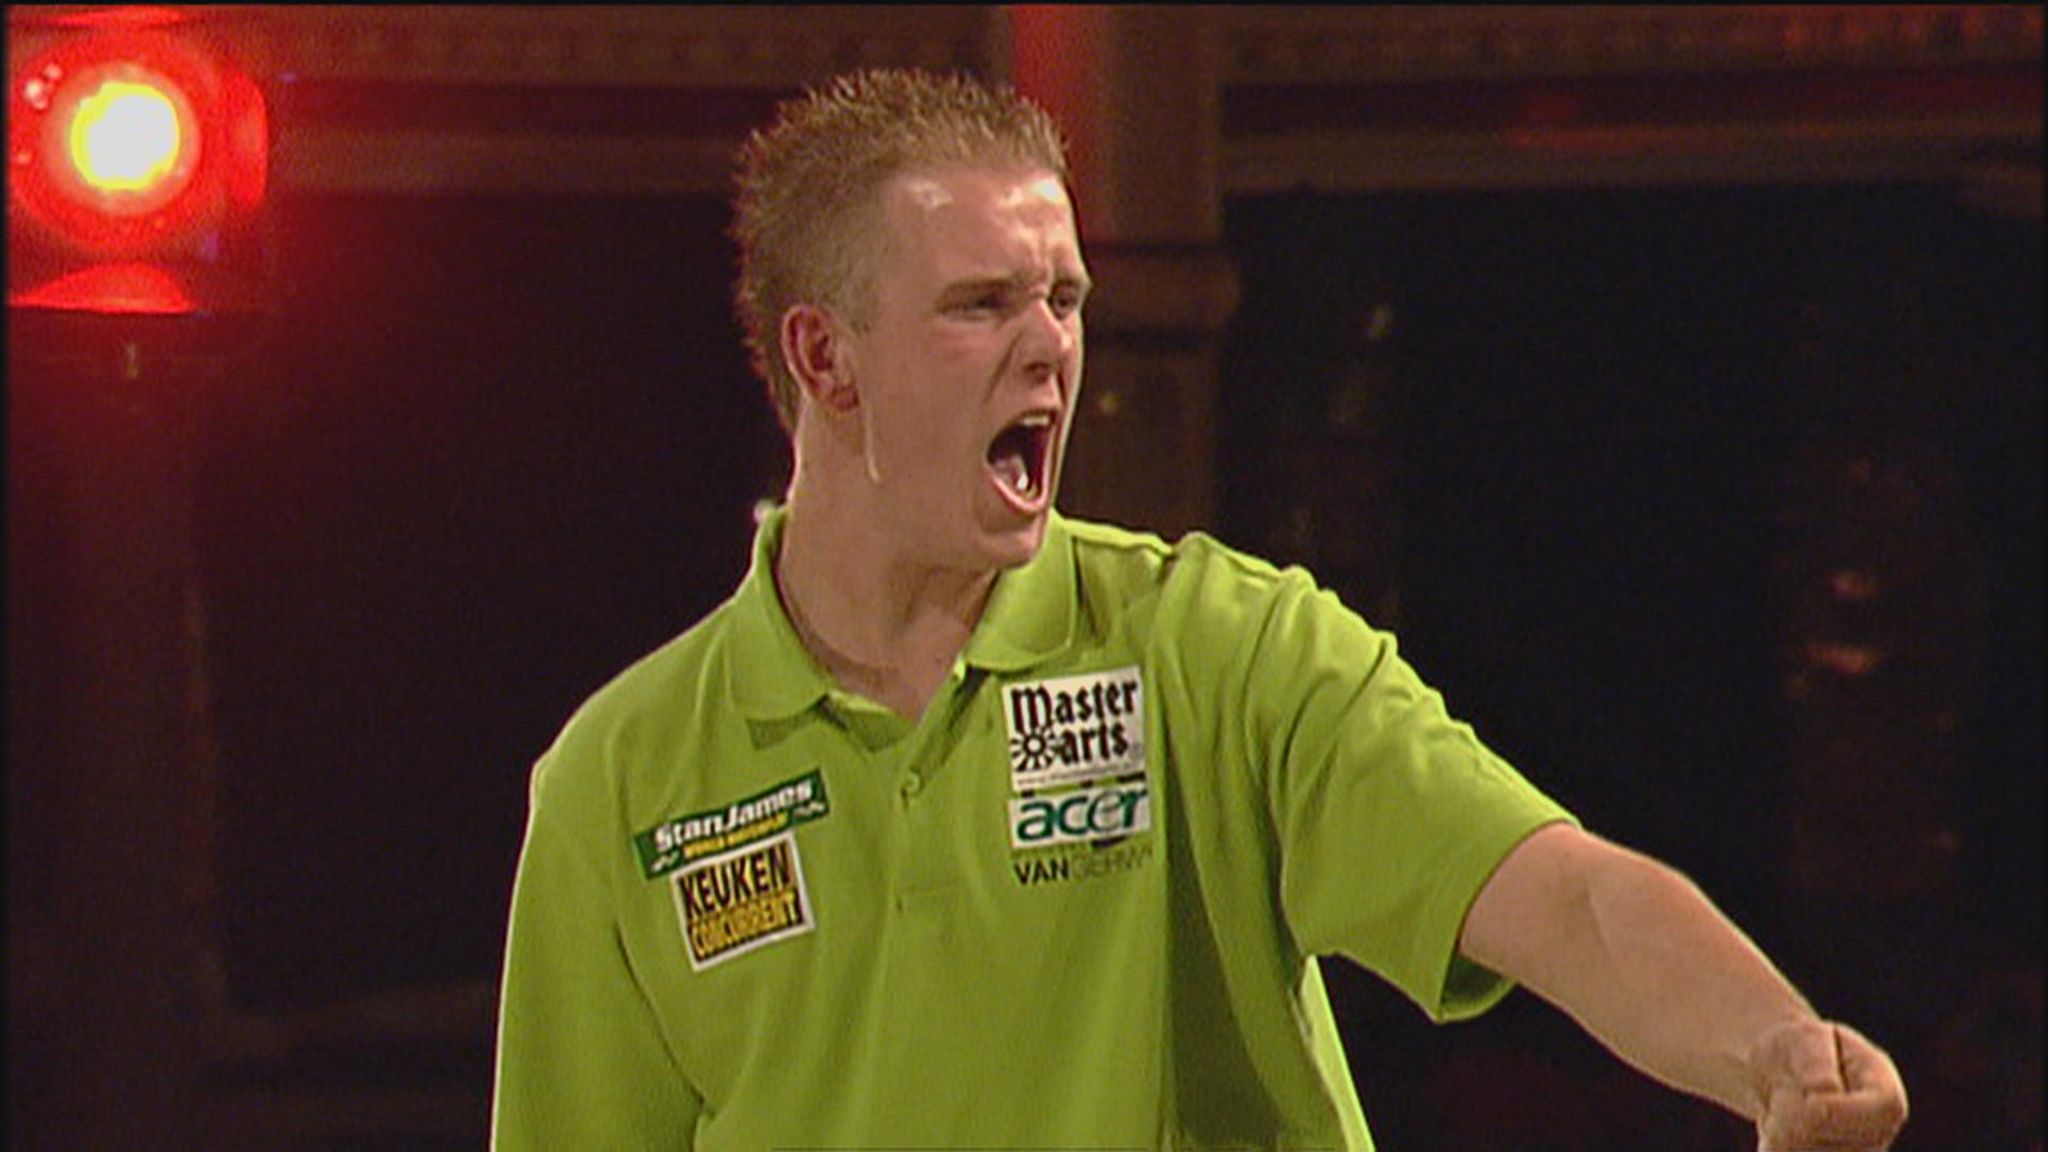 Michael van Gerwen showed early signs that he could conquer the says Rod Studd | Darts News | Sky Sports